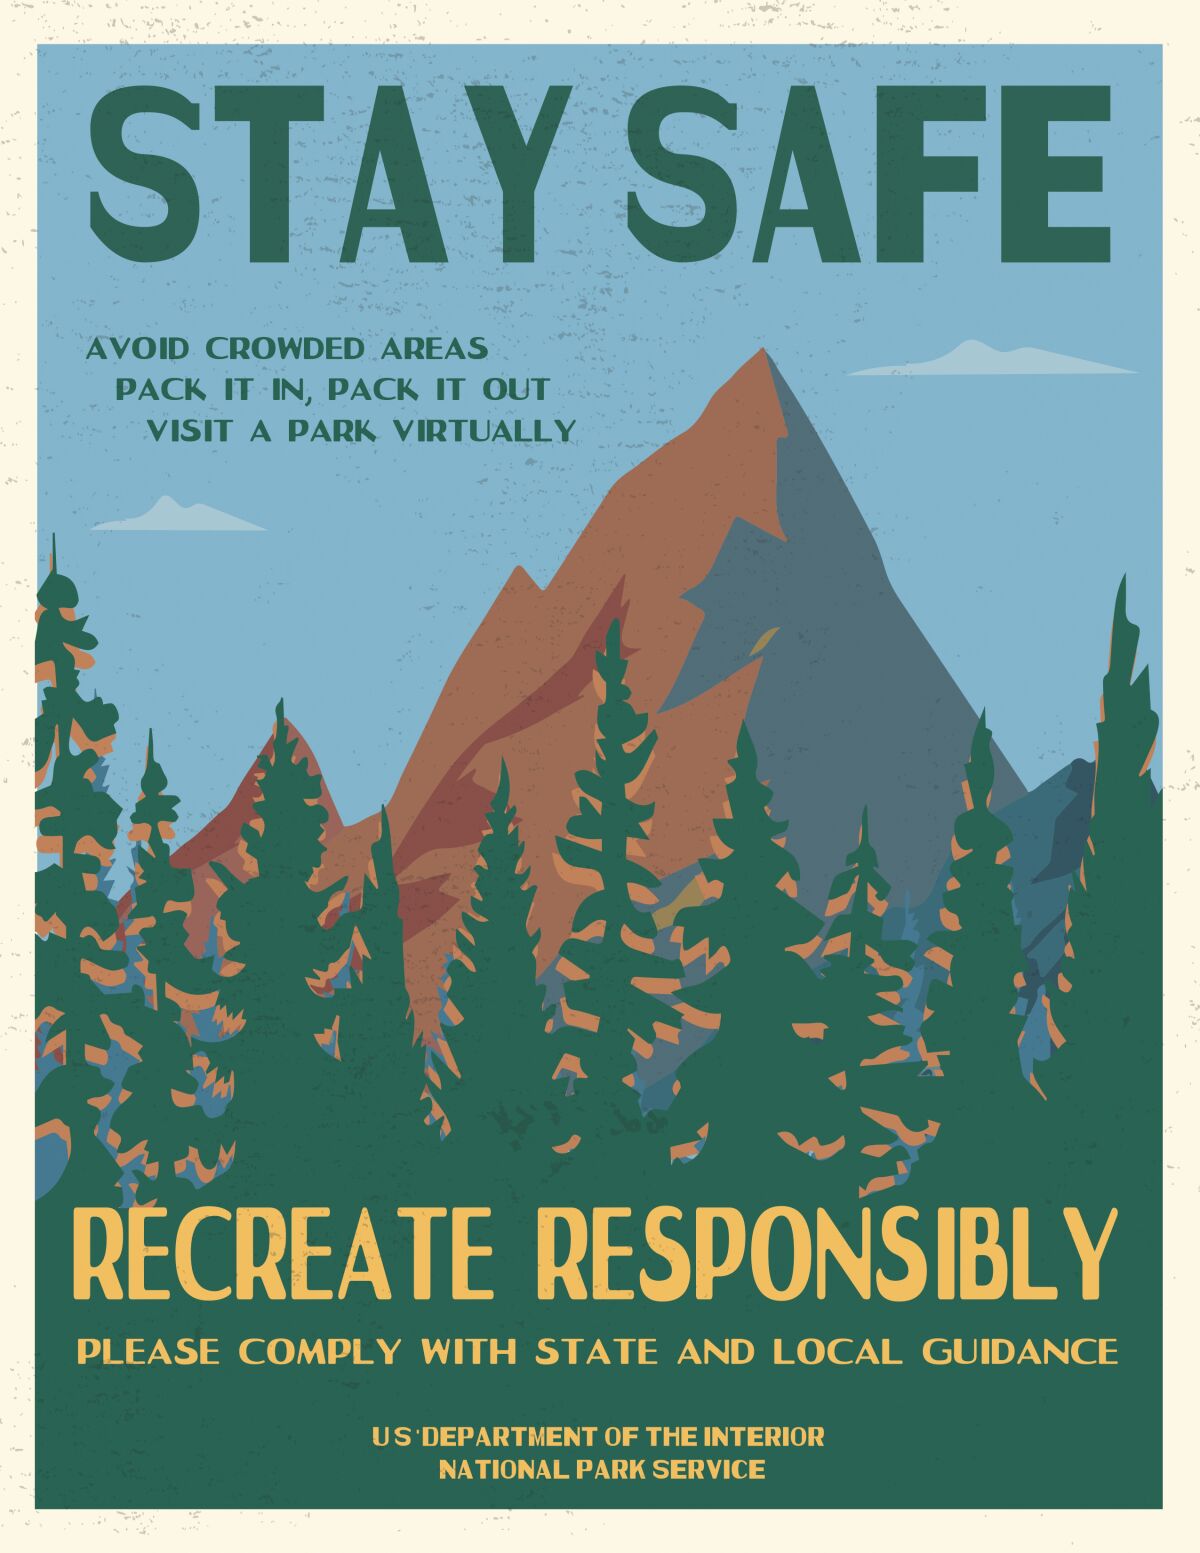 Poster from the National Park Service reminding people about social distancing.